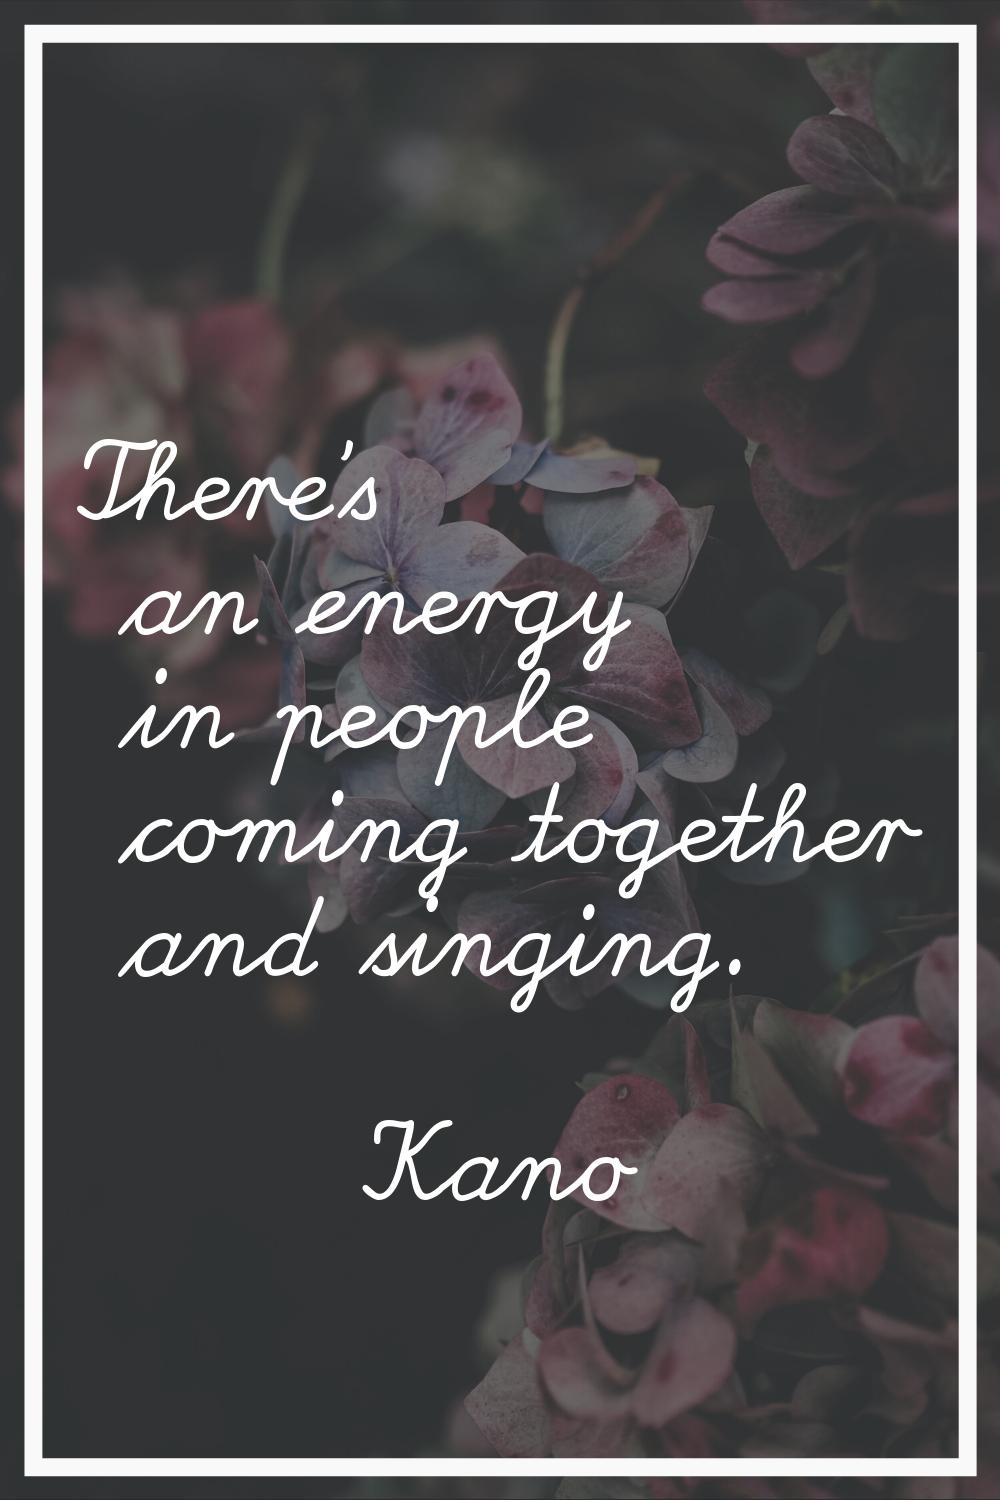 There's an energy in people coming together and singing.